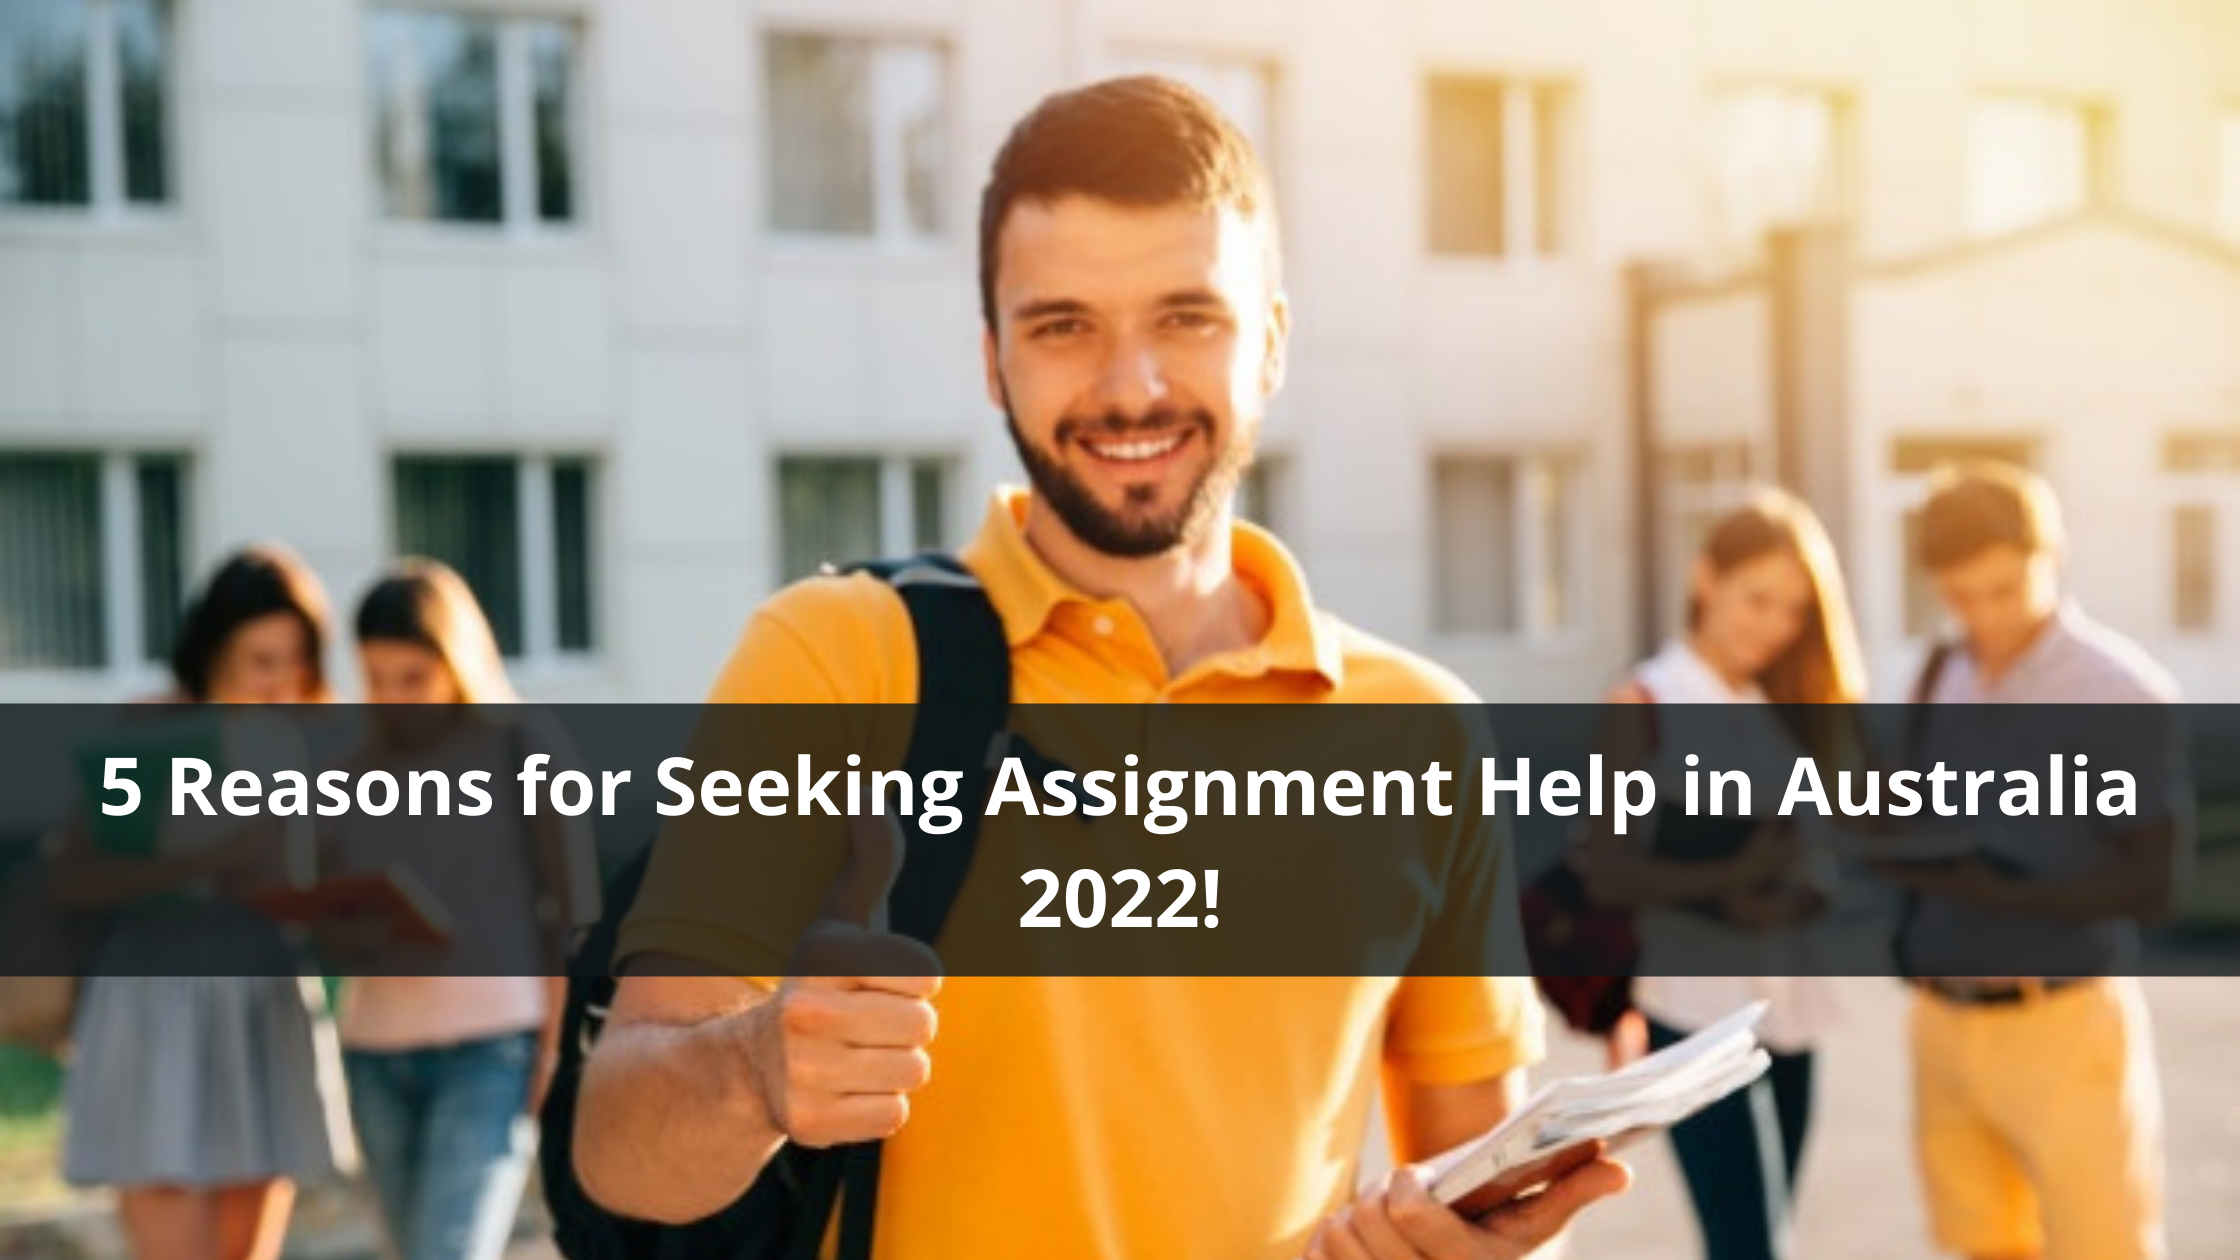 public/uploads/2021/12/5-Reasons-for-Seeking-Assignment-Help-in-Australia-2022.png